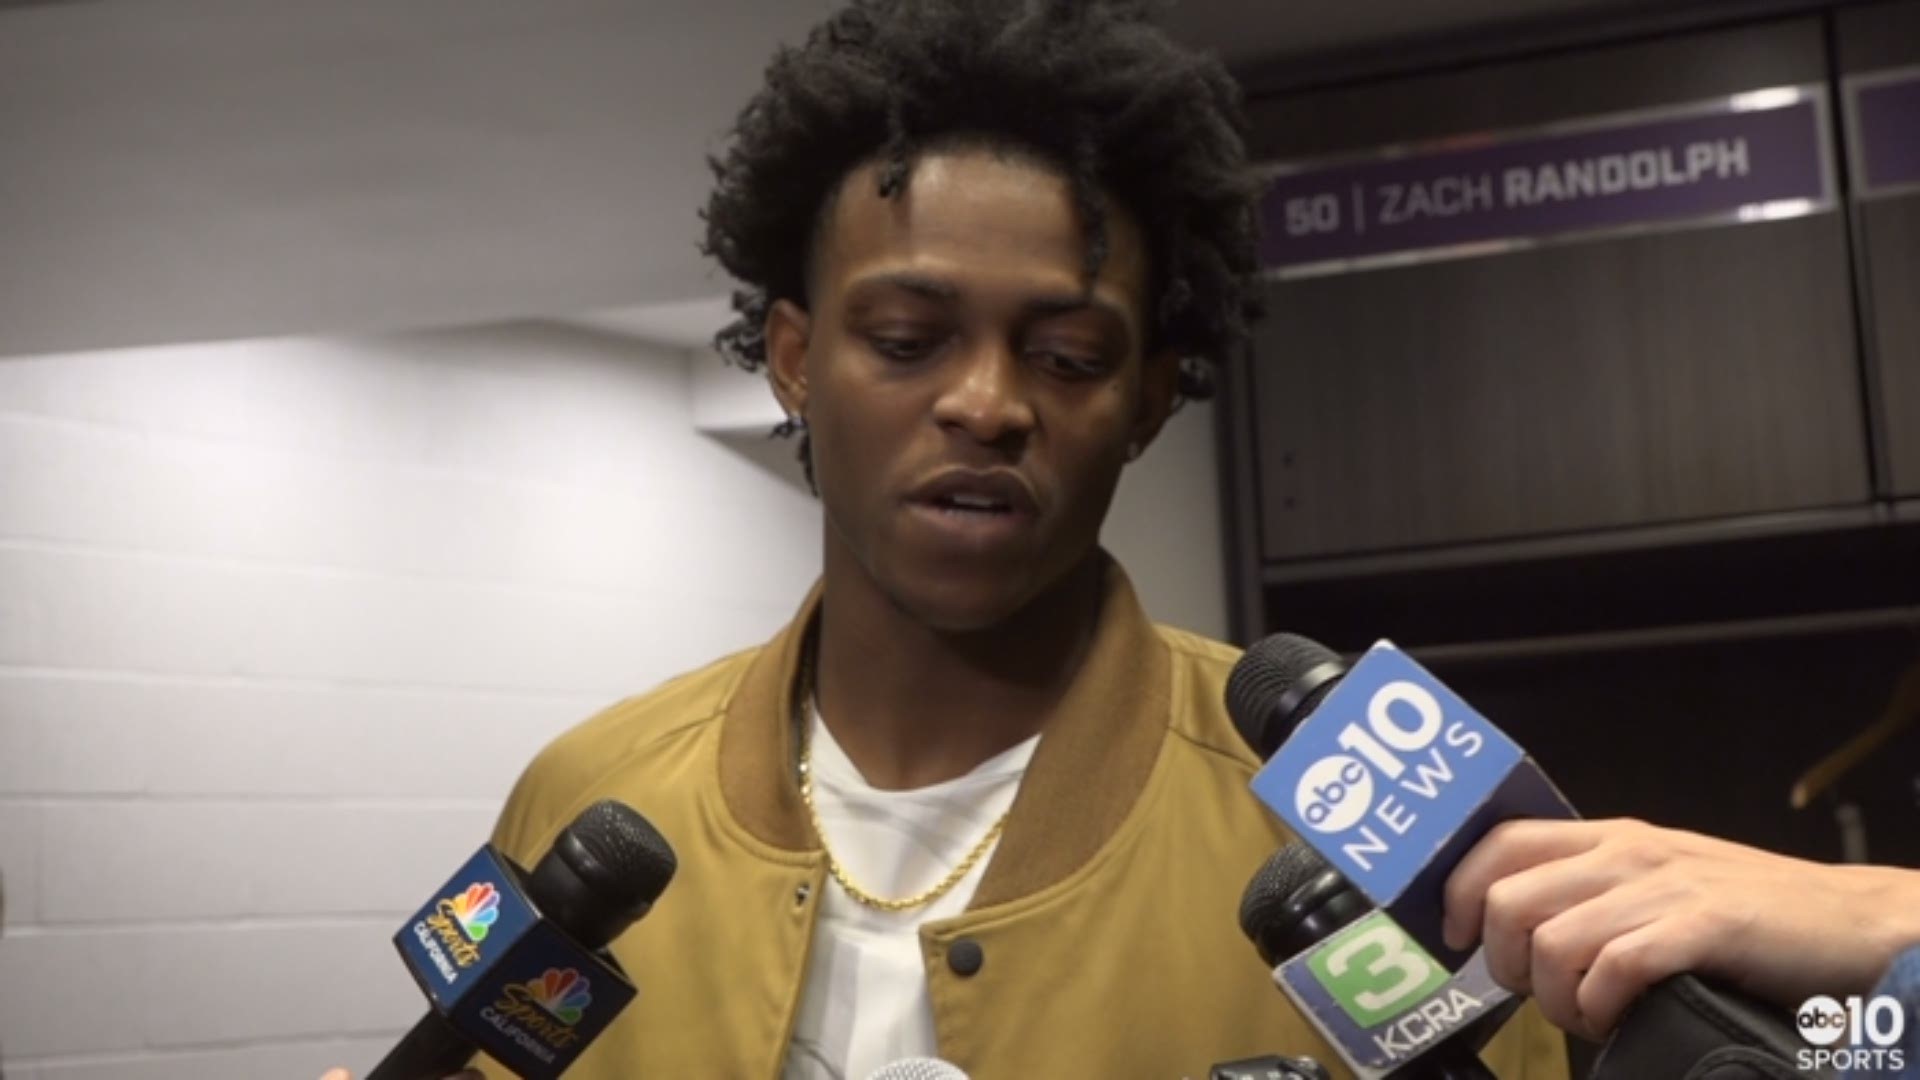 Kings point guard De'Aaron Fox talks about Monday's 32-point preseason victory over Maccabi Haifa, having Nemanja Bjelica back from injury and building the team's confidence before the season tips-off Oct. 17.